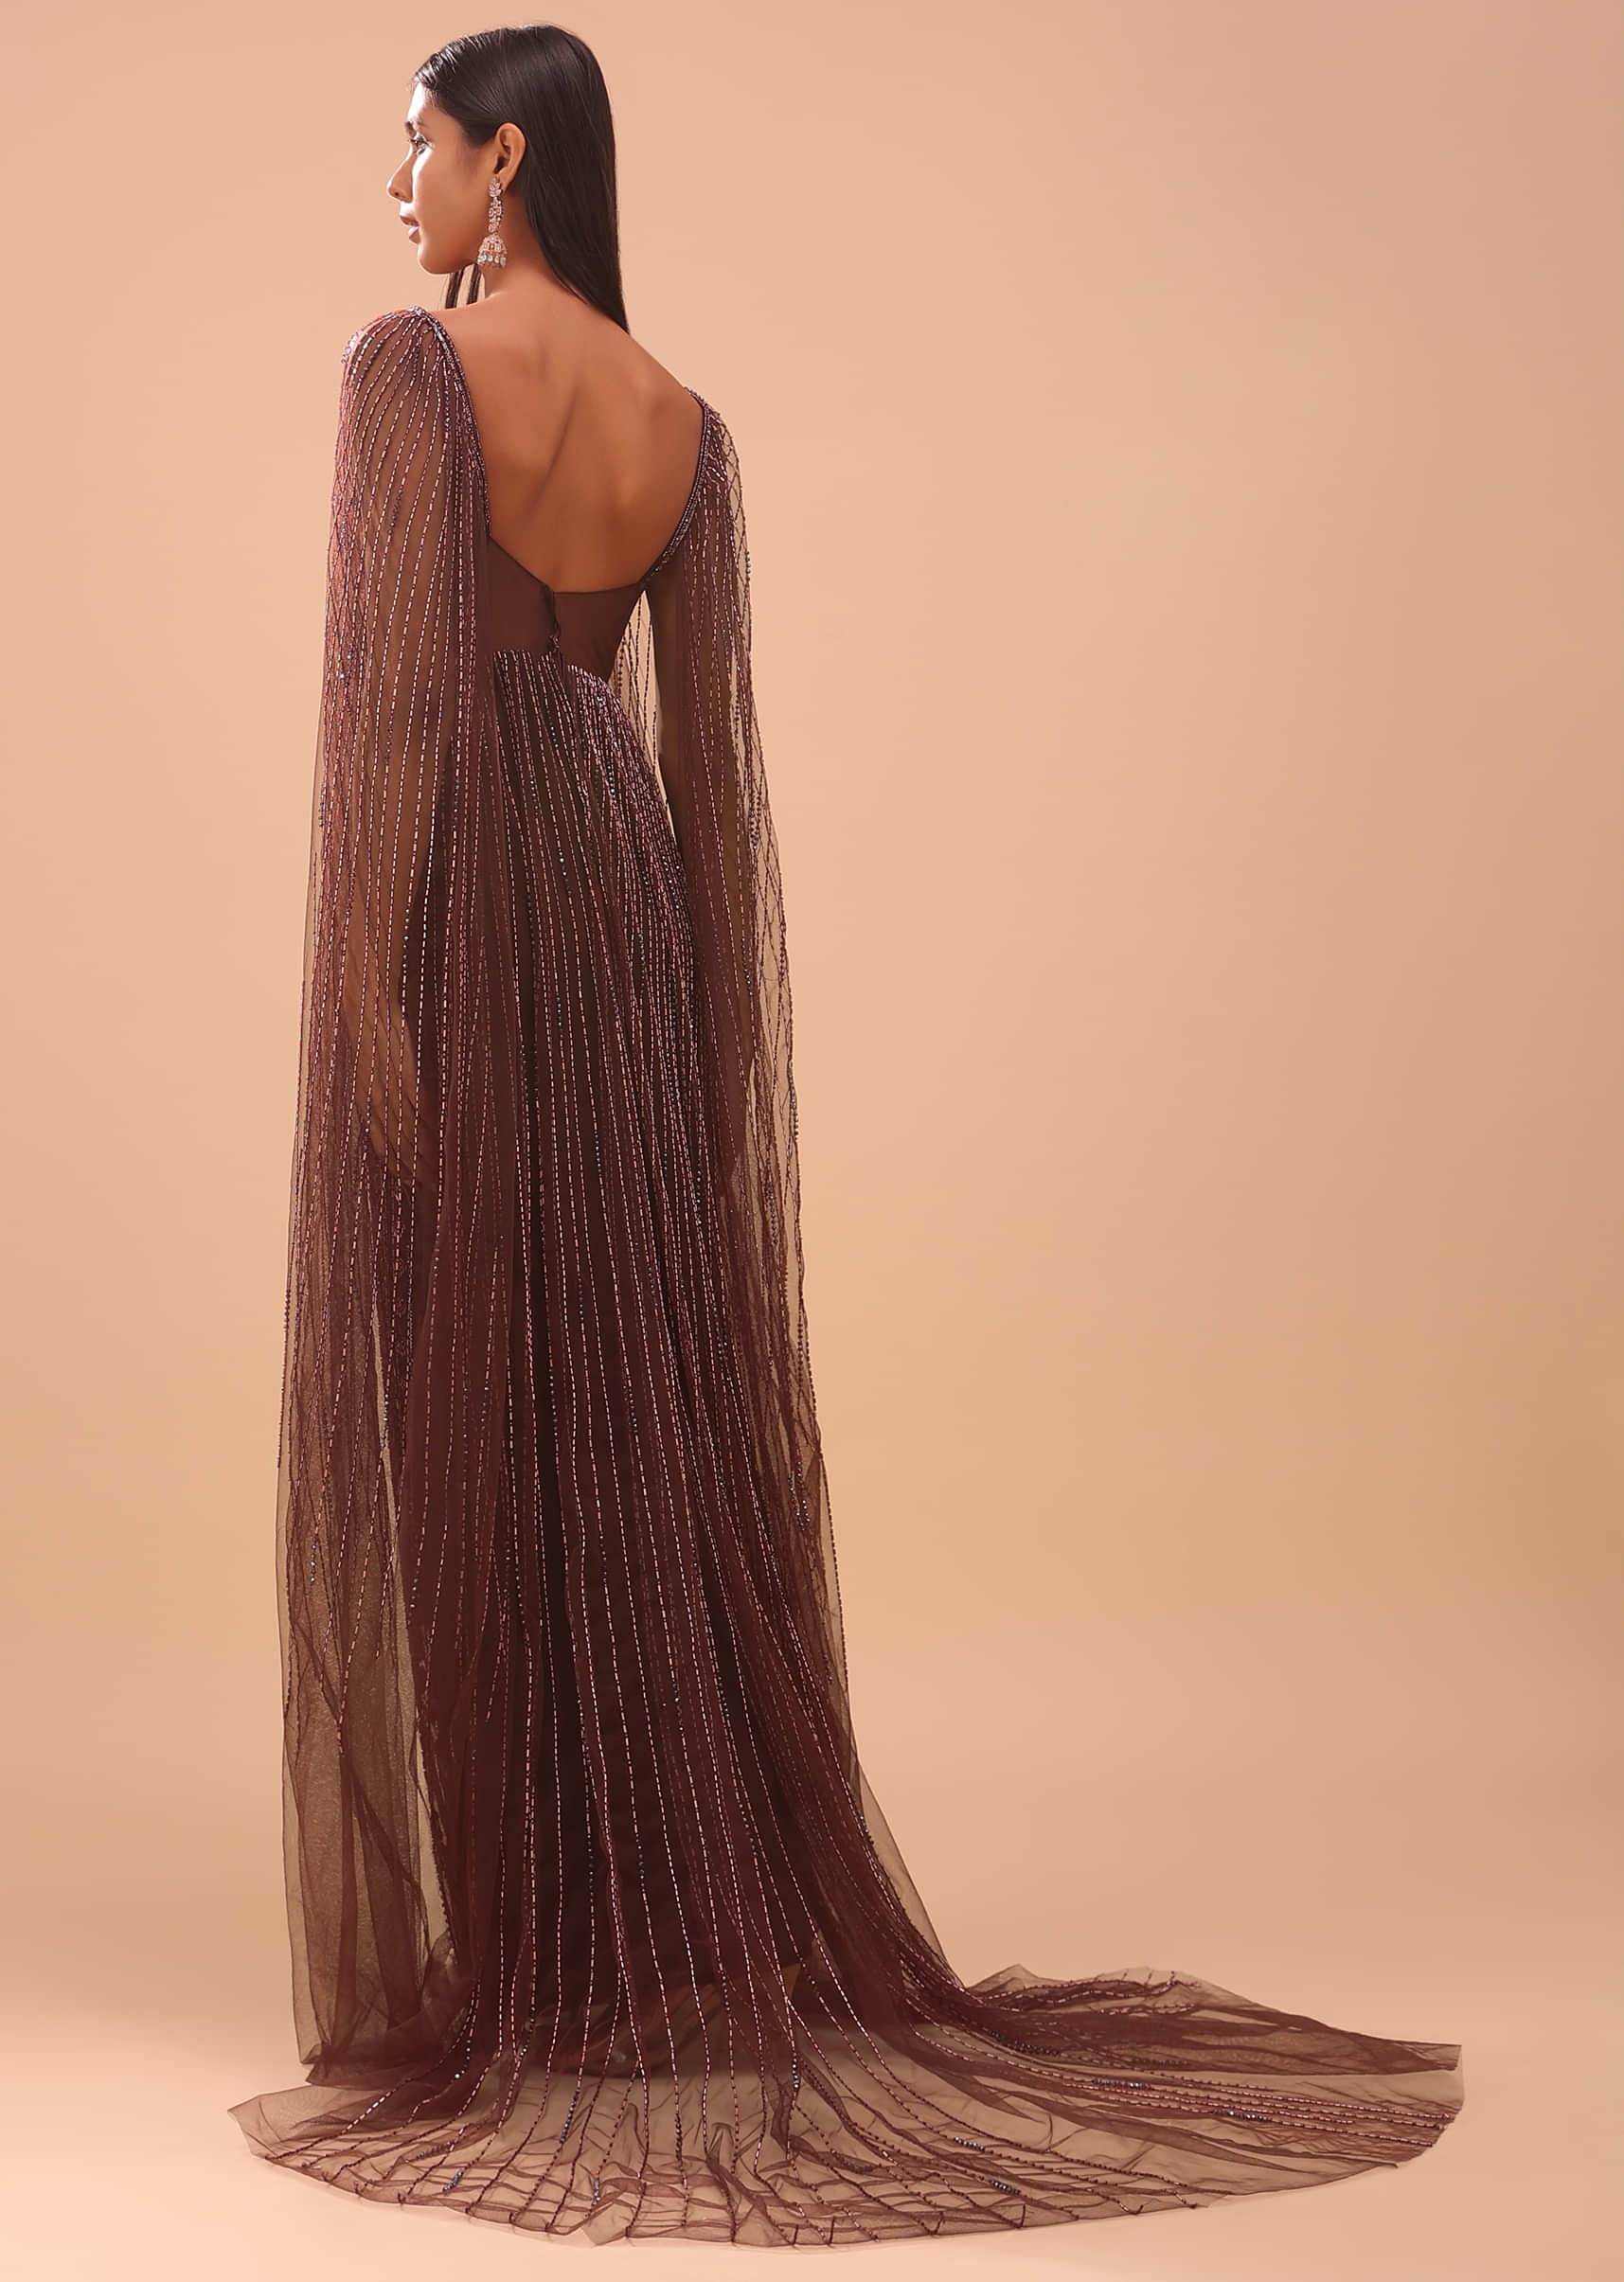 Chocolate Brown Gown In With Dreamy Cape Sleeves - NOOR 2022